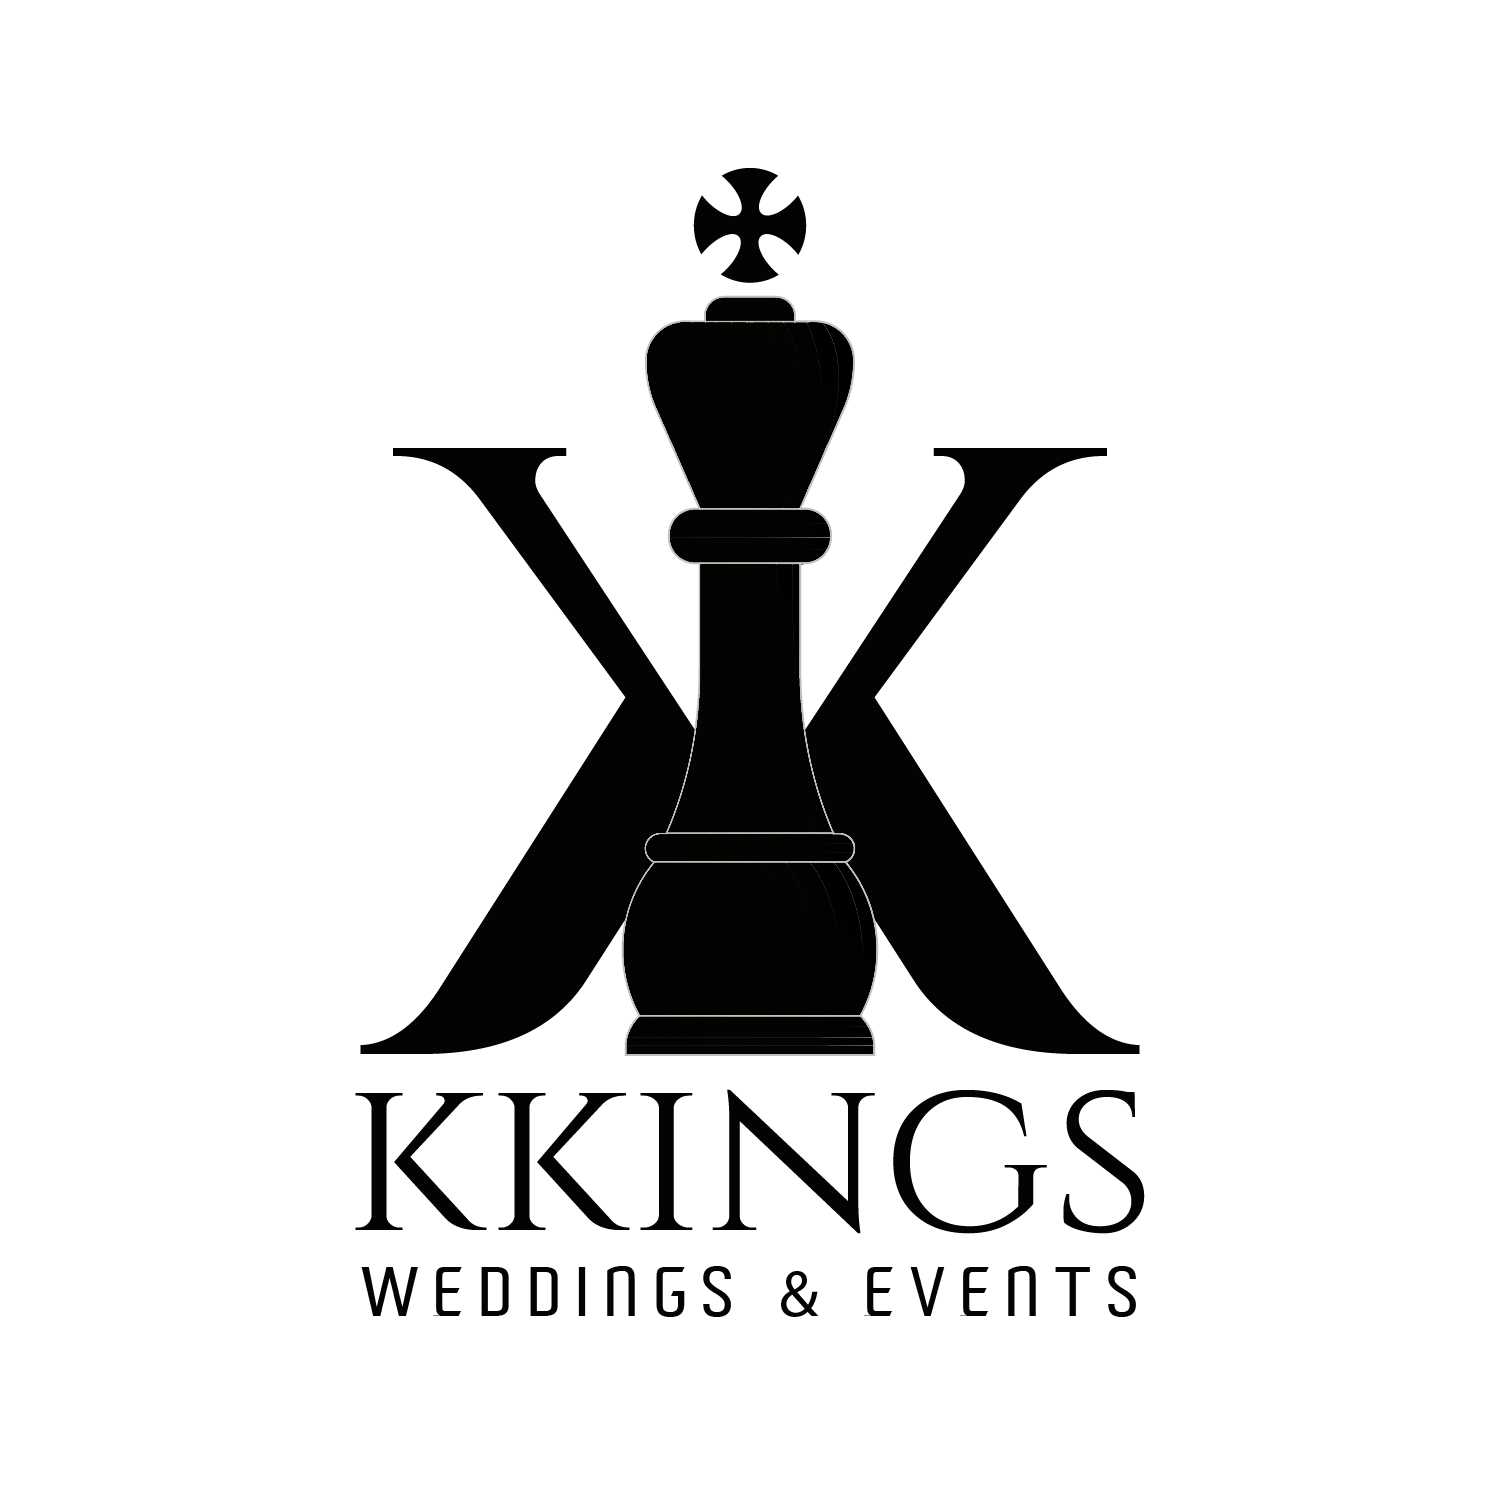 Kkings Logo Black with White Lines PNG